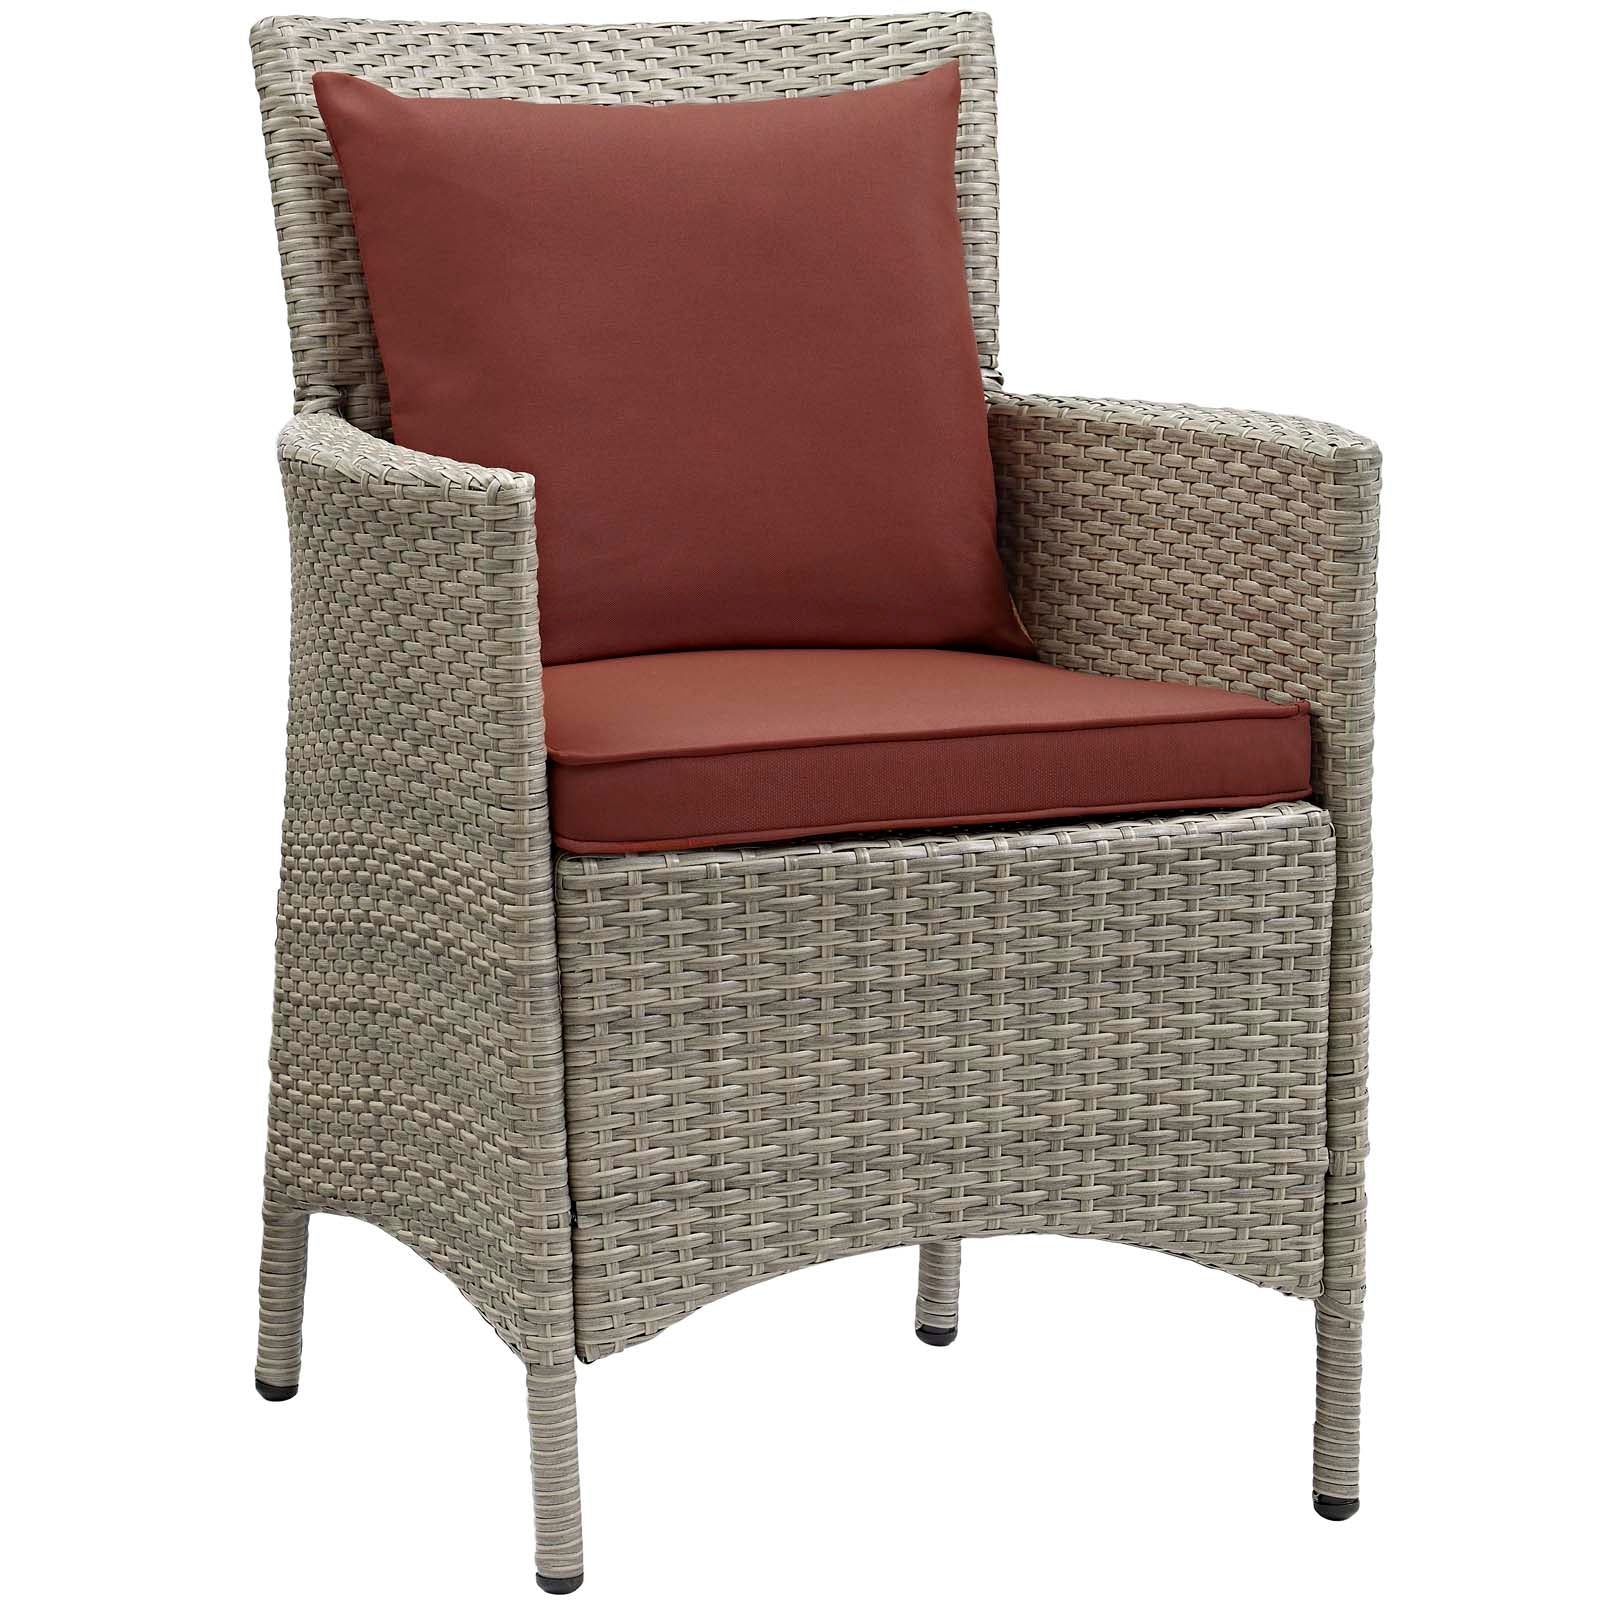 Modway Outdoor Dining Chairs - Conduit Outdoor Patio Wicker Rattan Dining Armchair Light Gray Currant